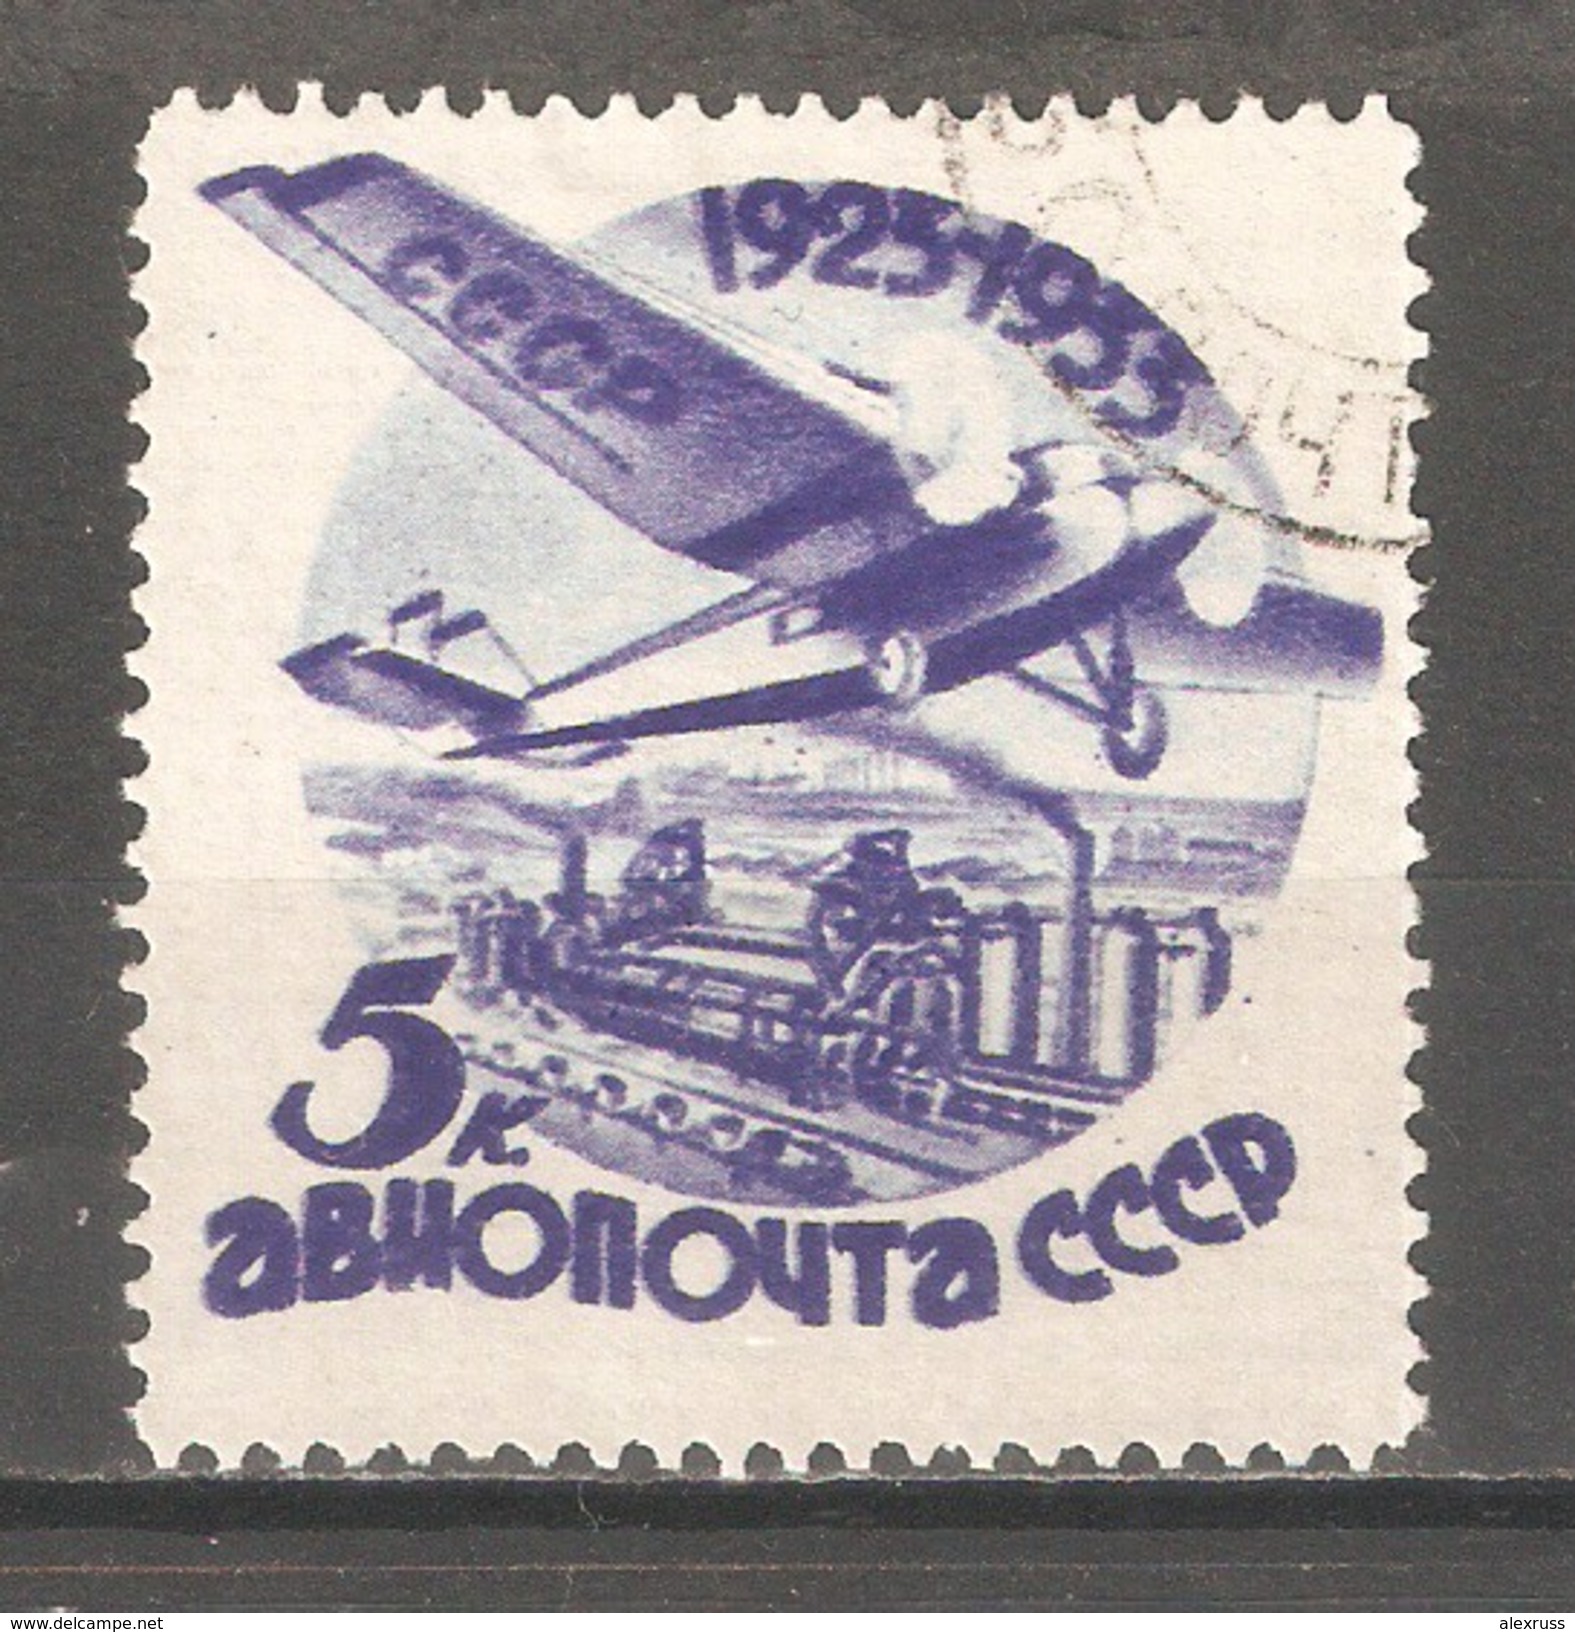 Russia/USSR 1933,Aviation Perf 11,Sc C45,VF USED Very Nice Forgery !! - Oblitérés